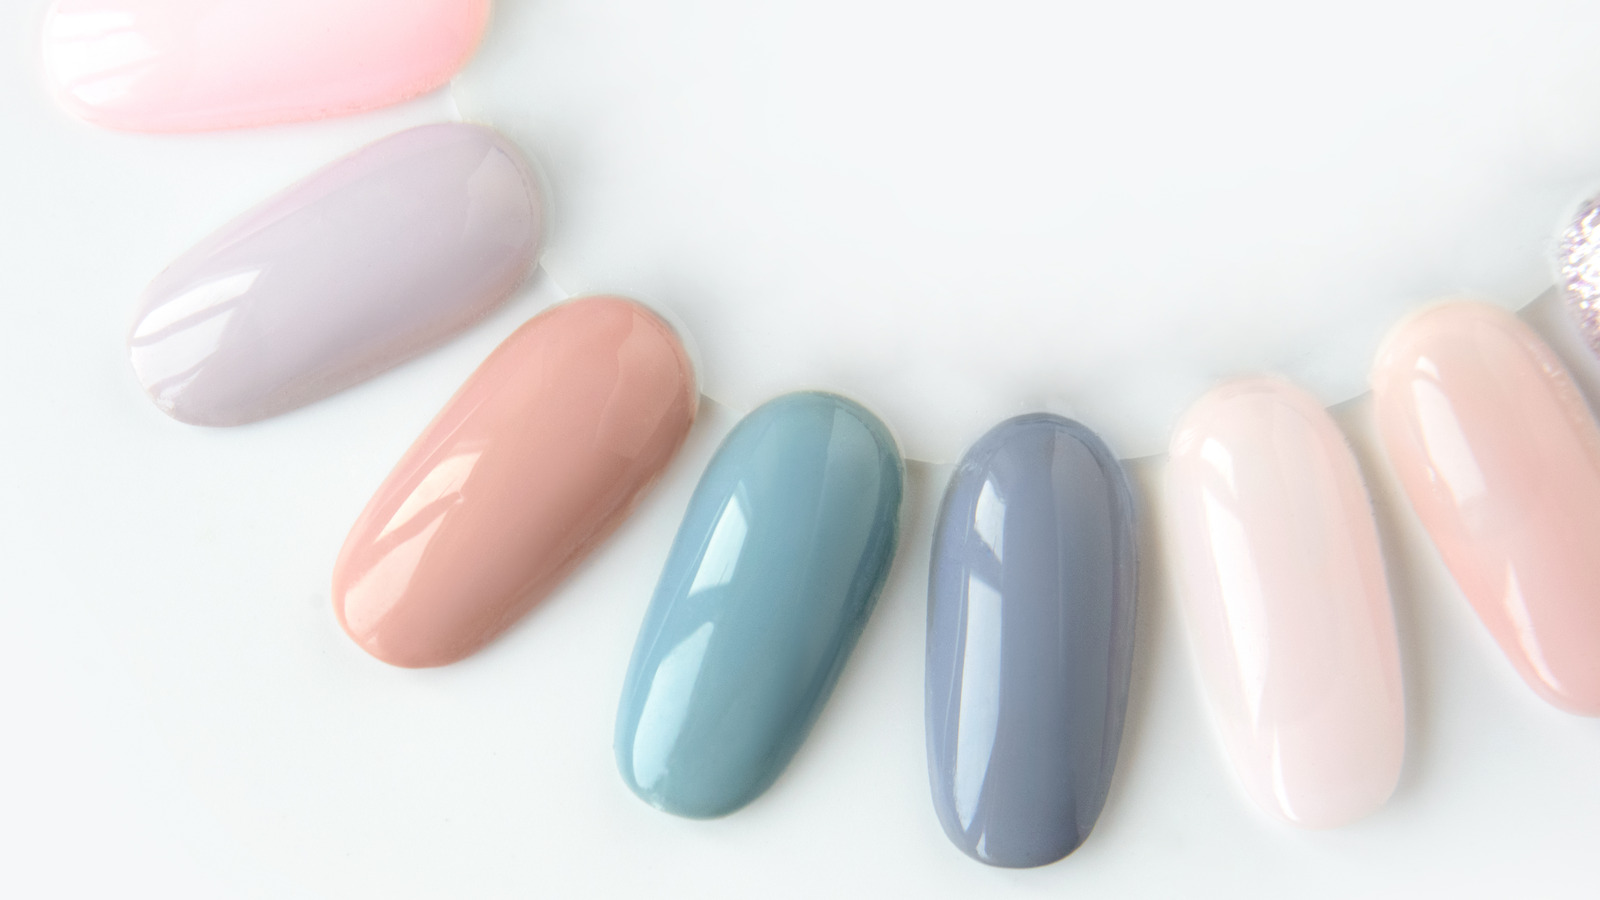 Glam's Exclusive Survey Uncovers Fans' Go-To Type Of Manicure